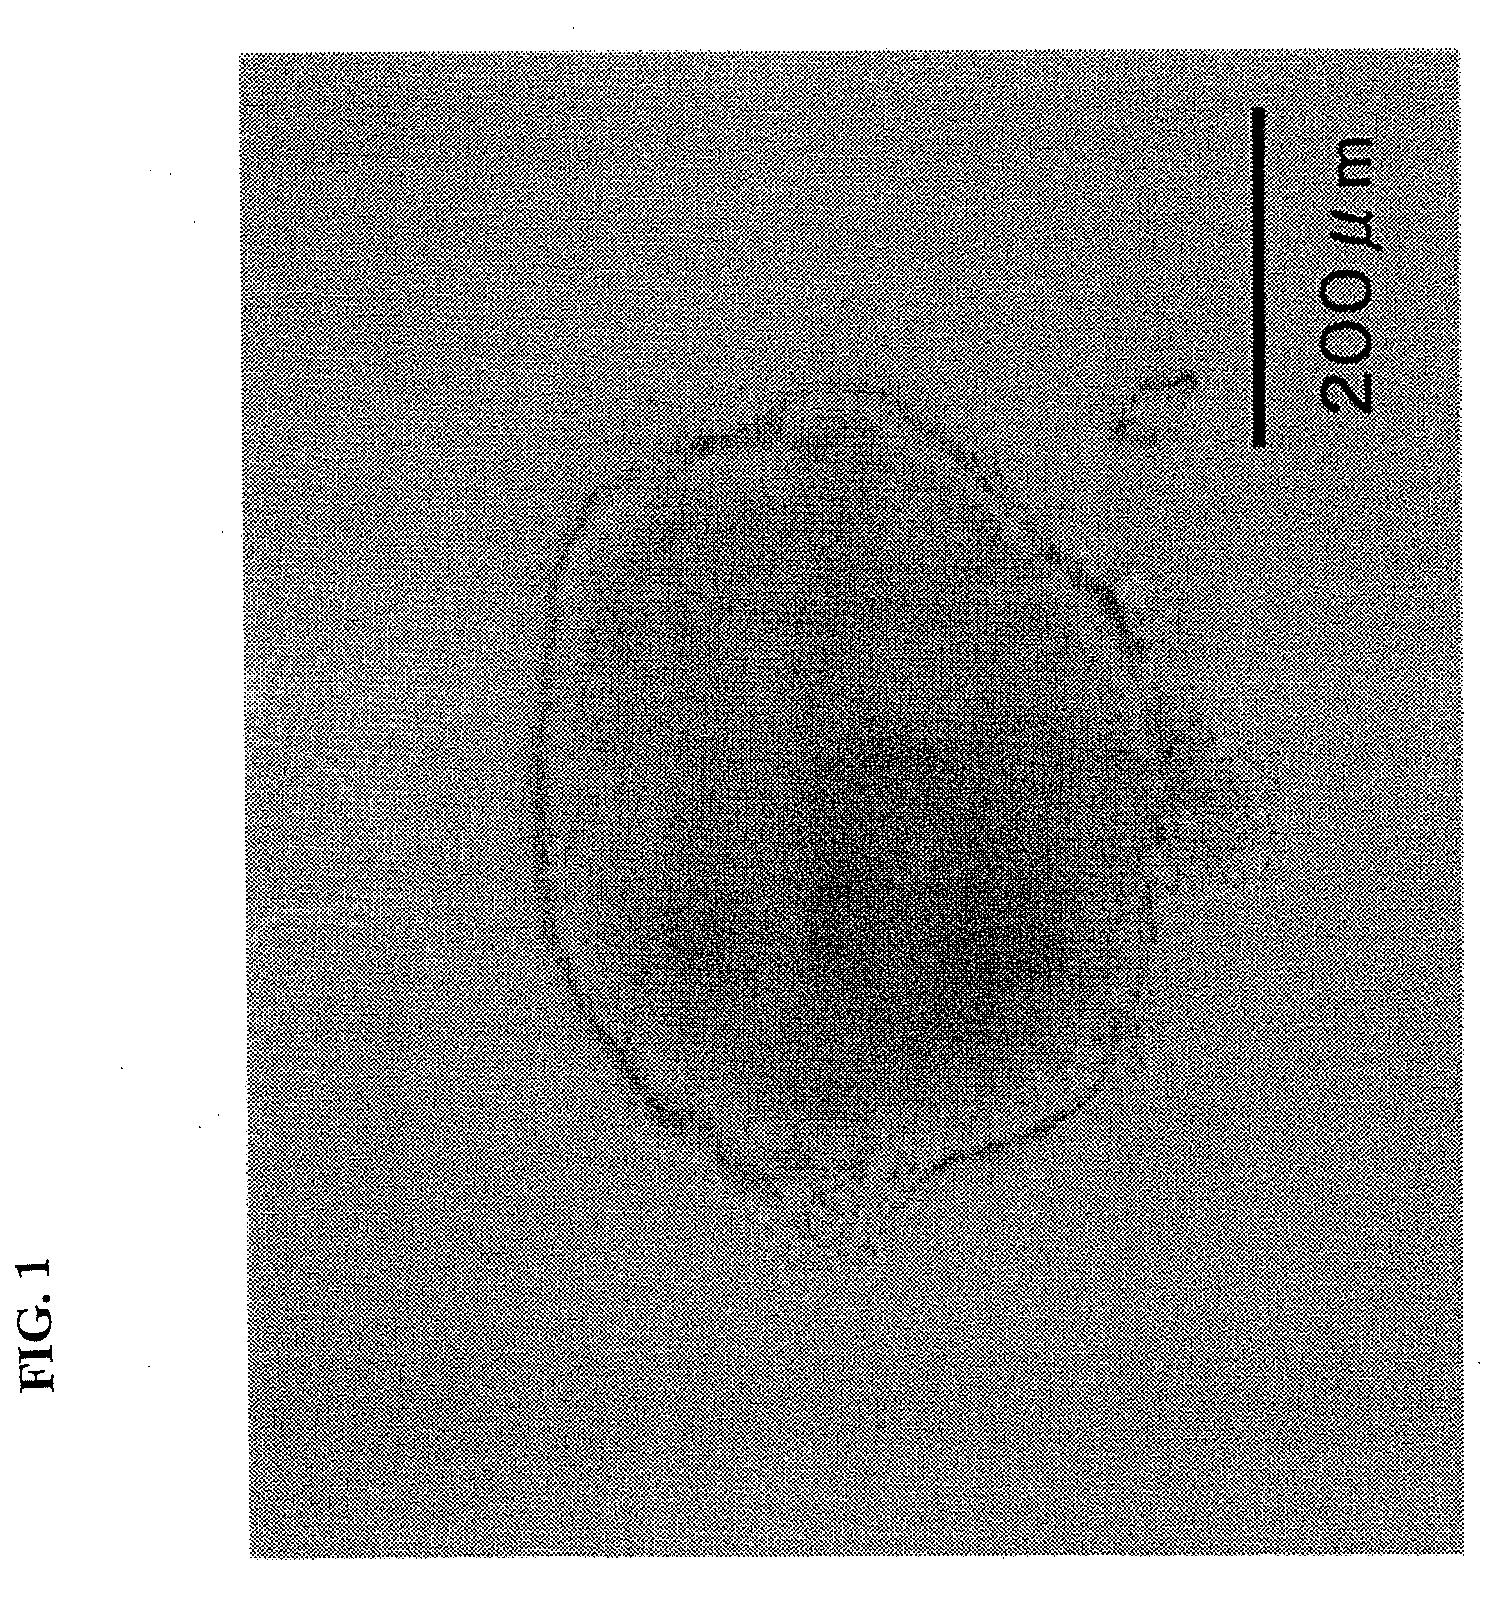 Container for germ layer formation and method of forming germ layer